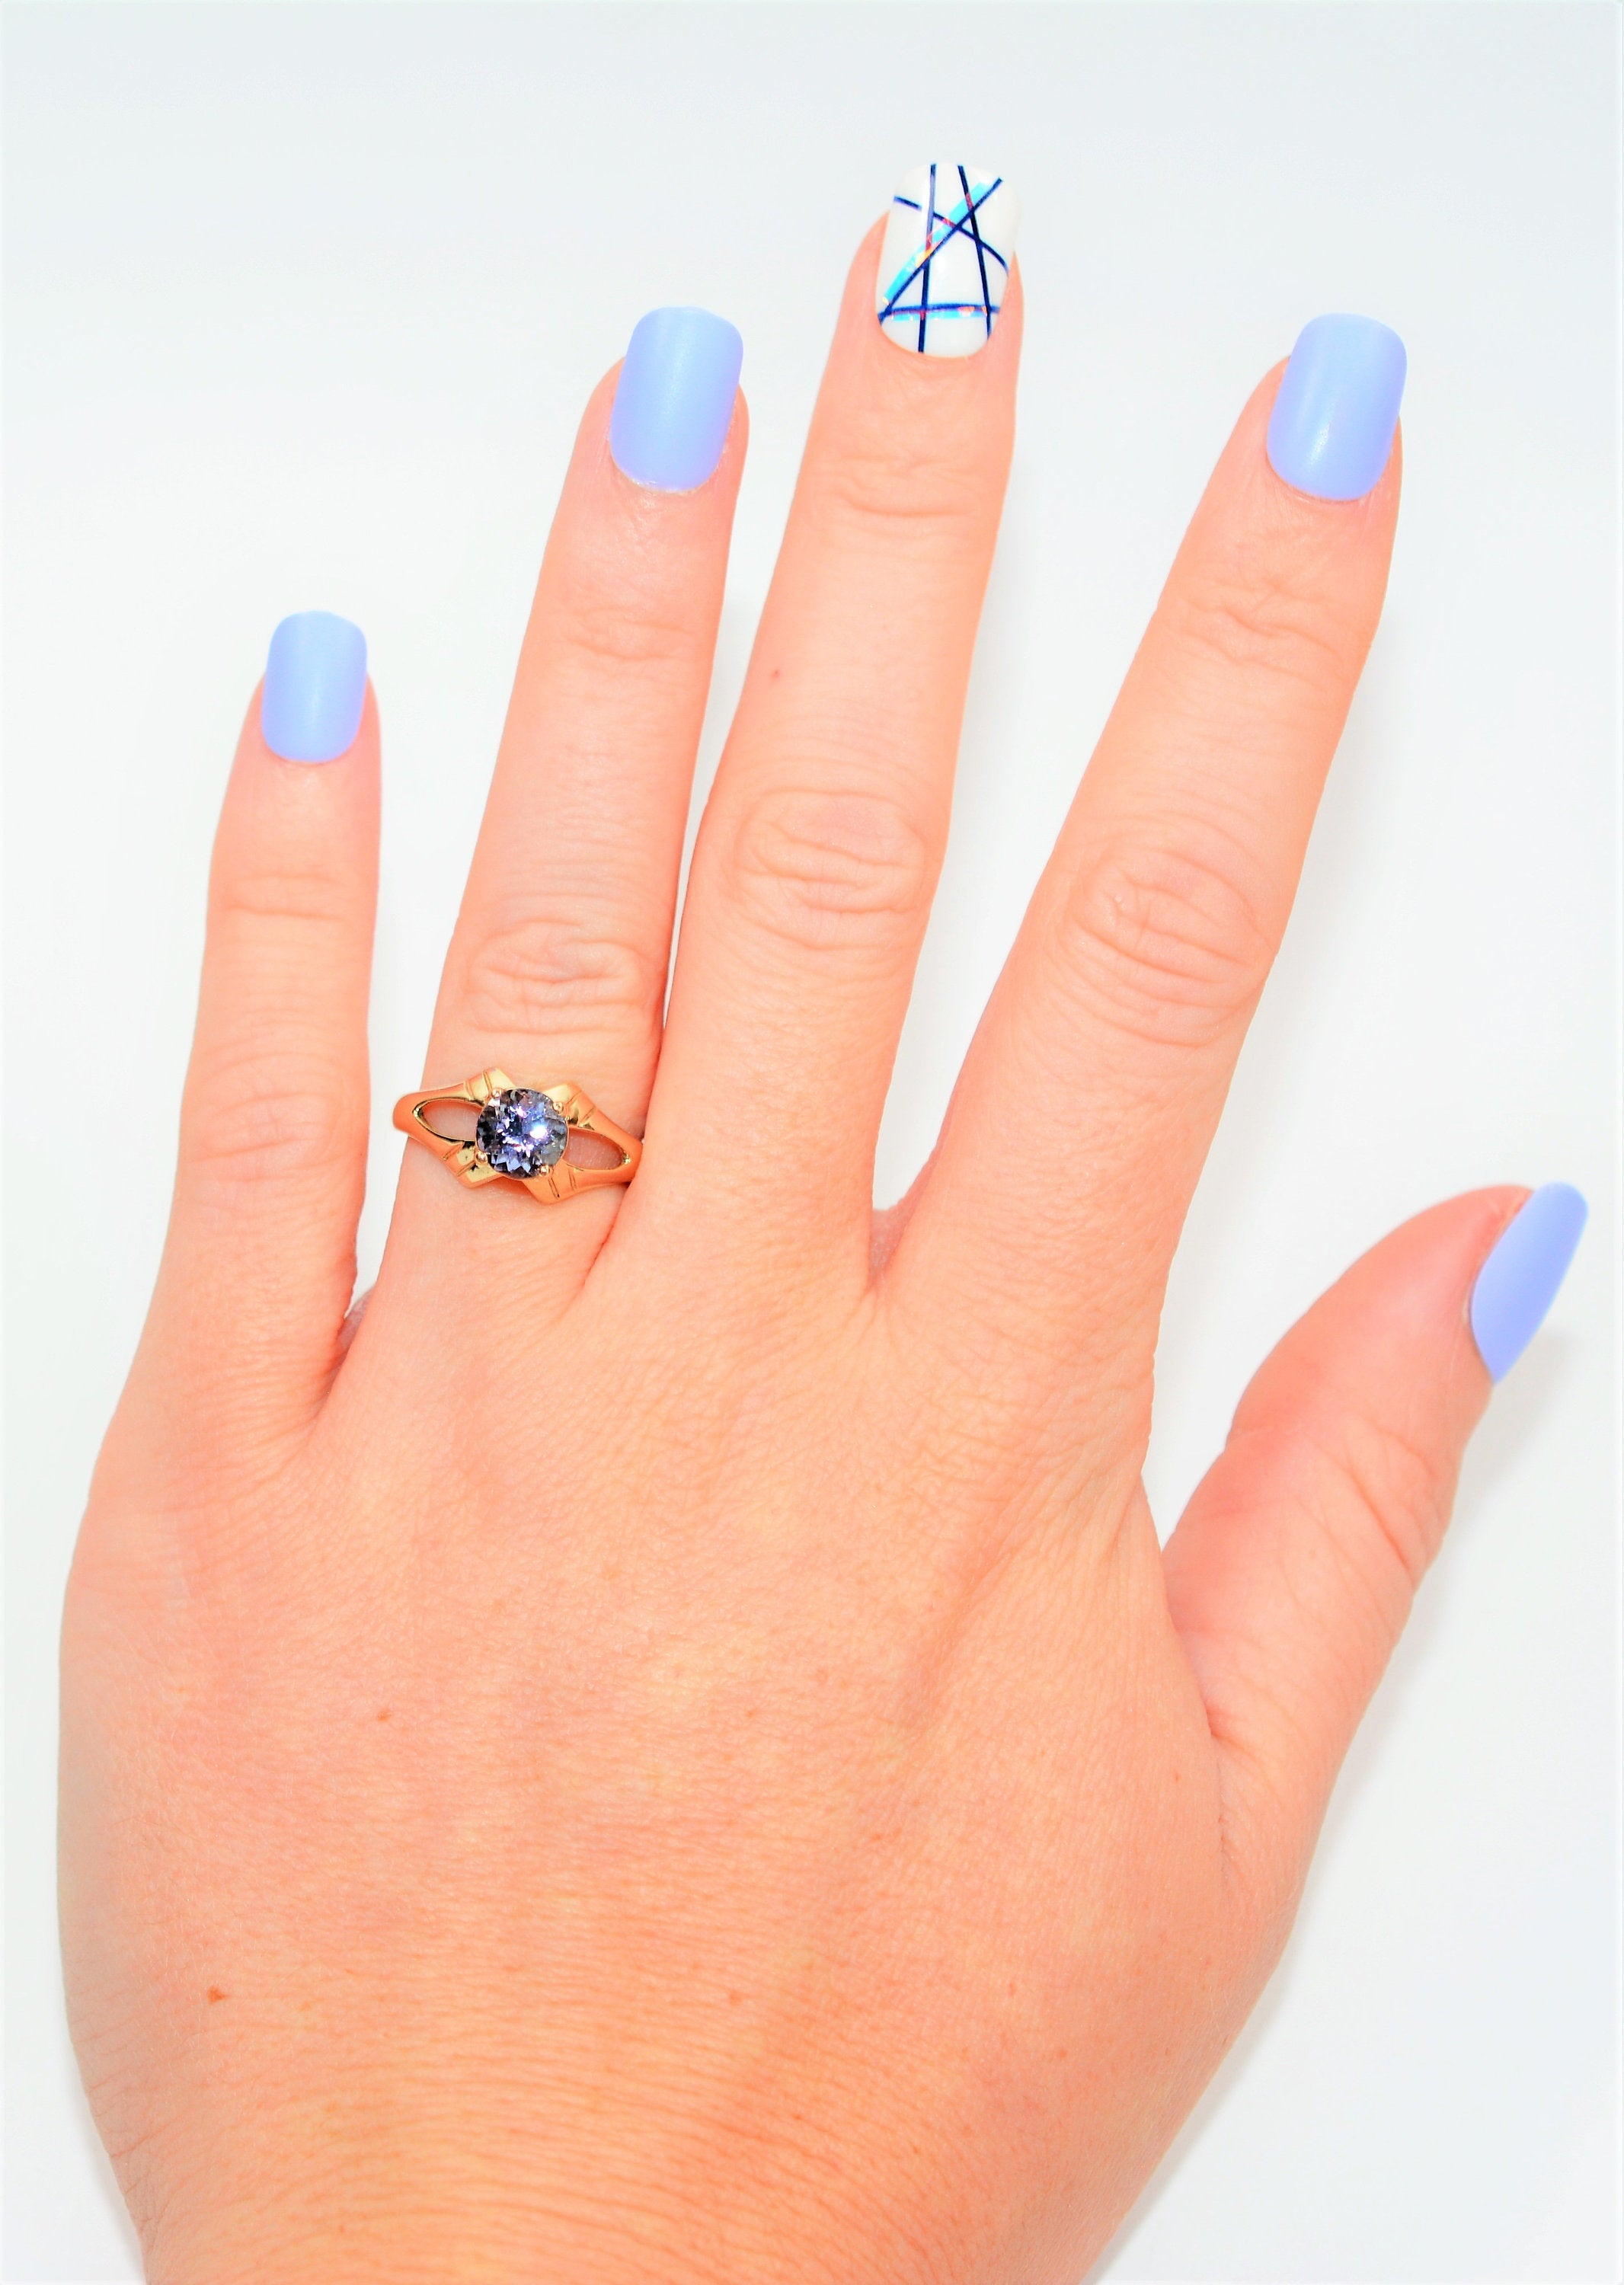 Natural Tanzanite Ring 10K Solid Gold 1.09ct Solitaire Ring Vintage Ring Estate Jewelry Women’s Ring Ladies Ring December Birthstone Ring